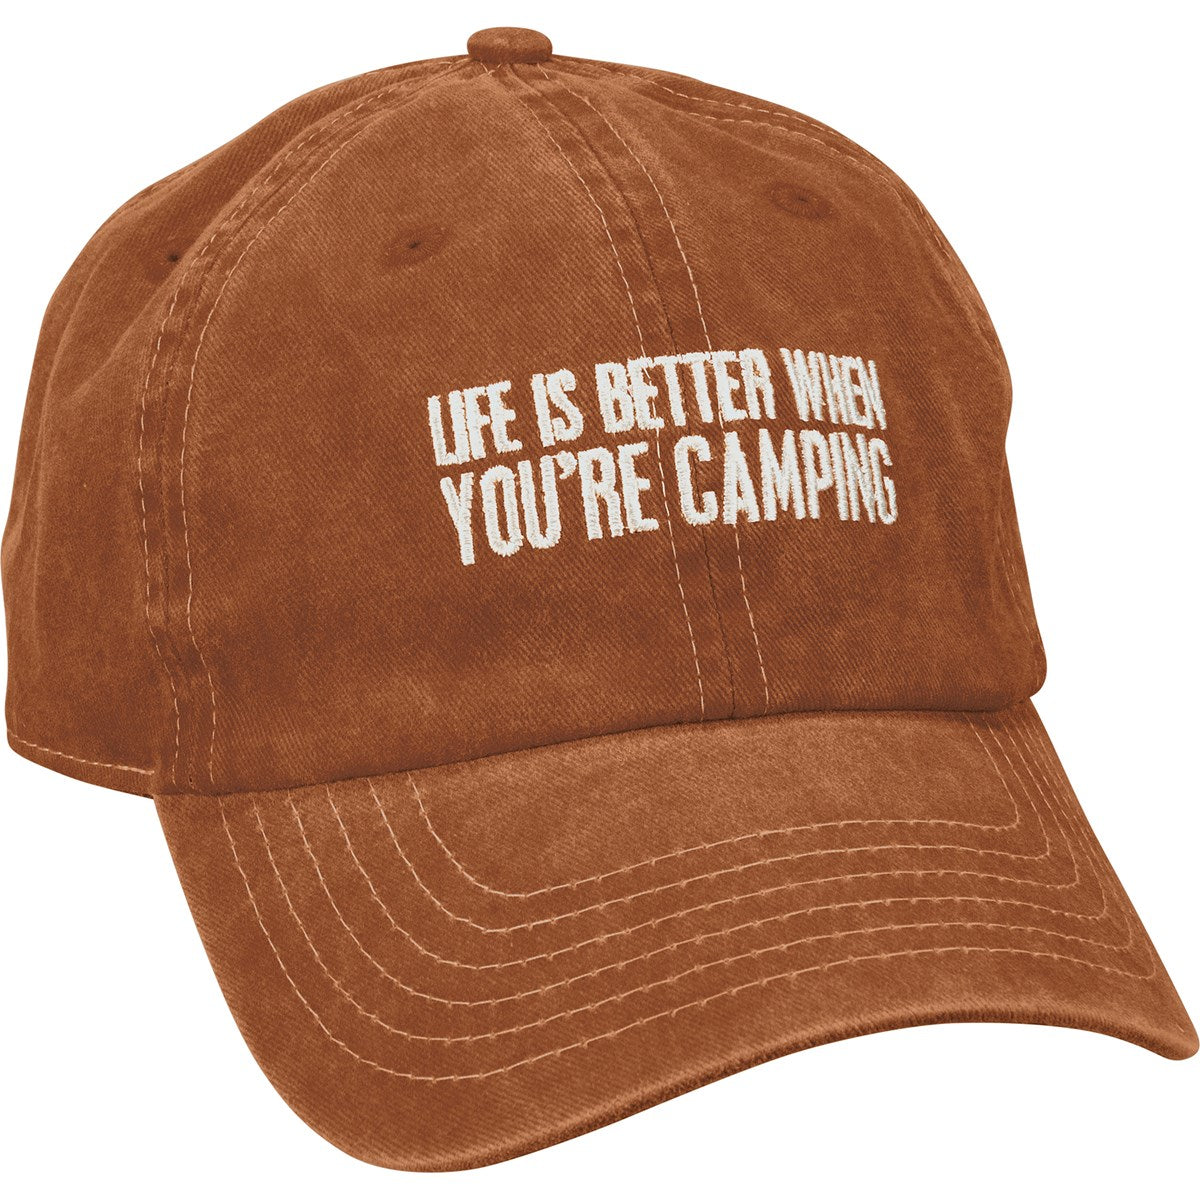 Primitives by Kathy Baseball Cap - Life Is Better When You're Camping